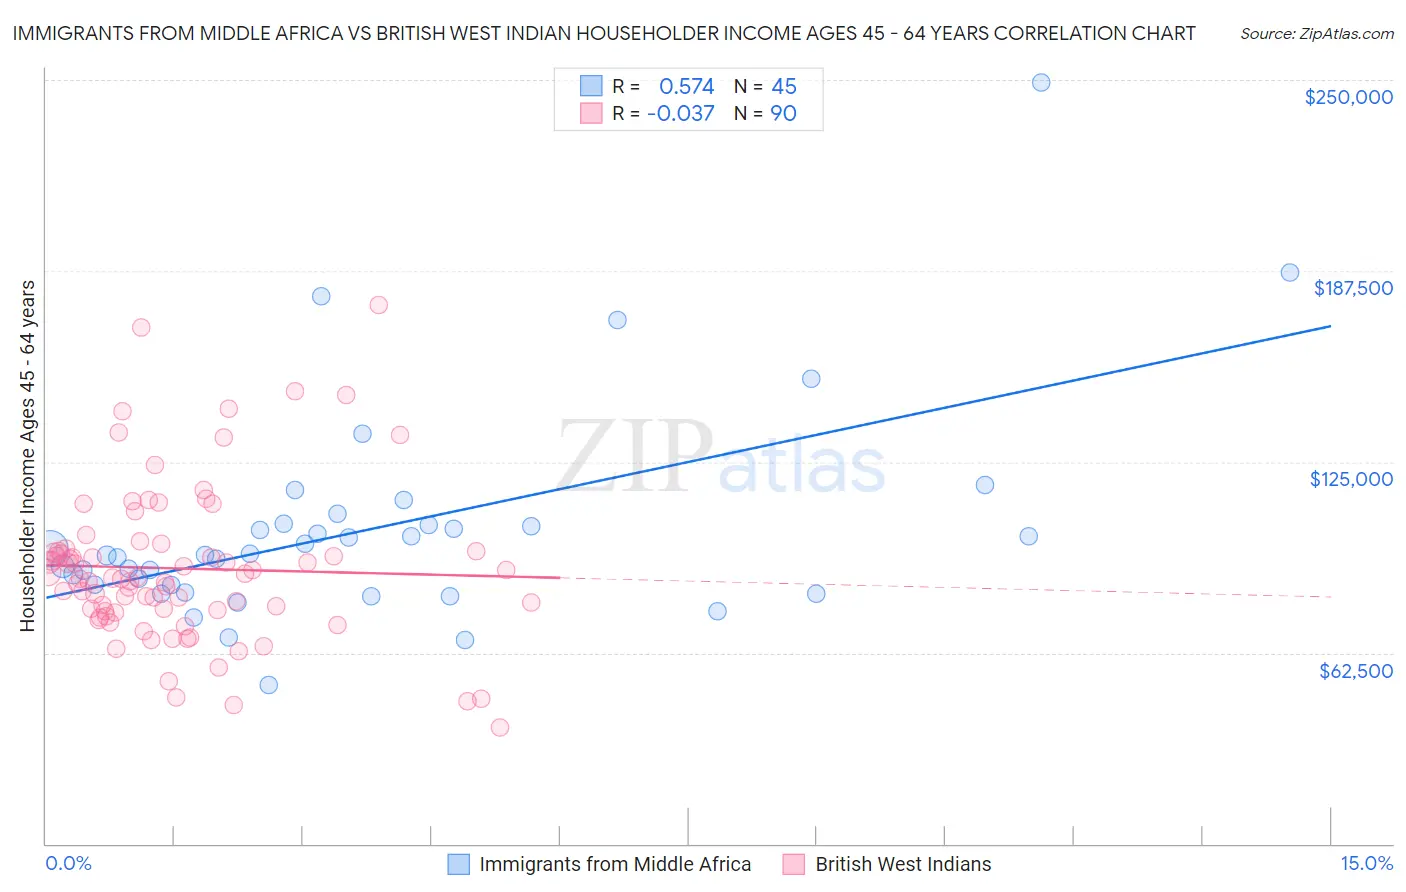 Immigrants from Middle Africa vs British West Indian Householder Income Ages 45 - 64 years